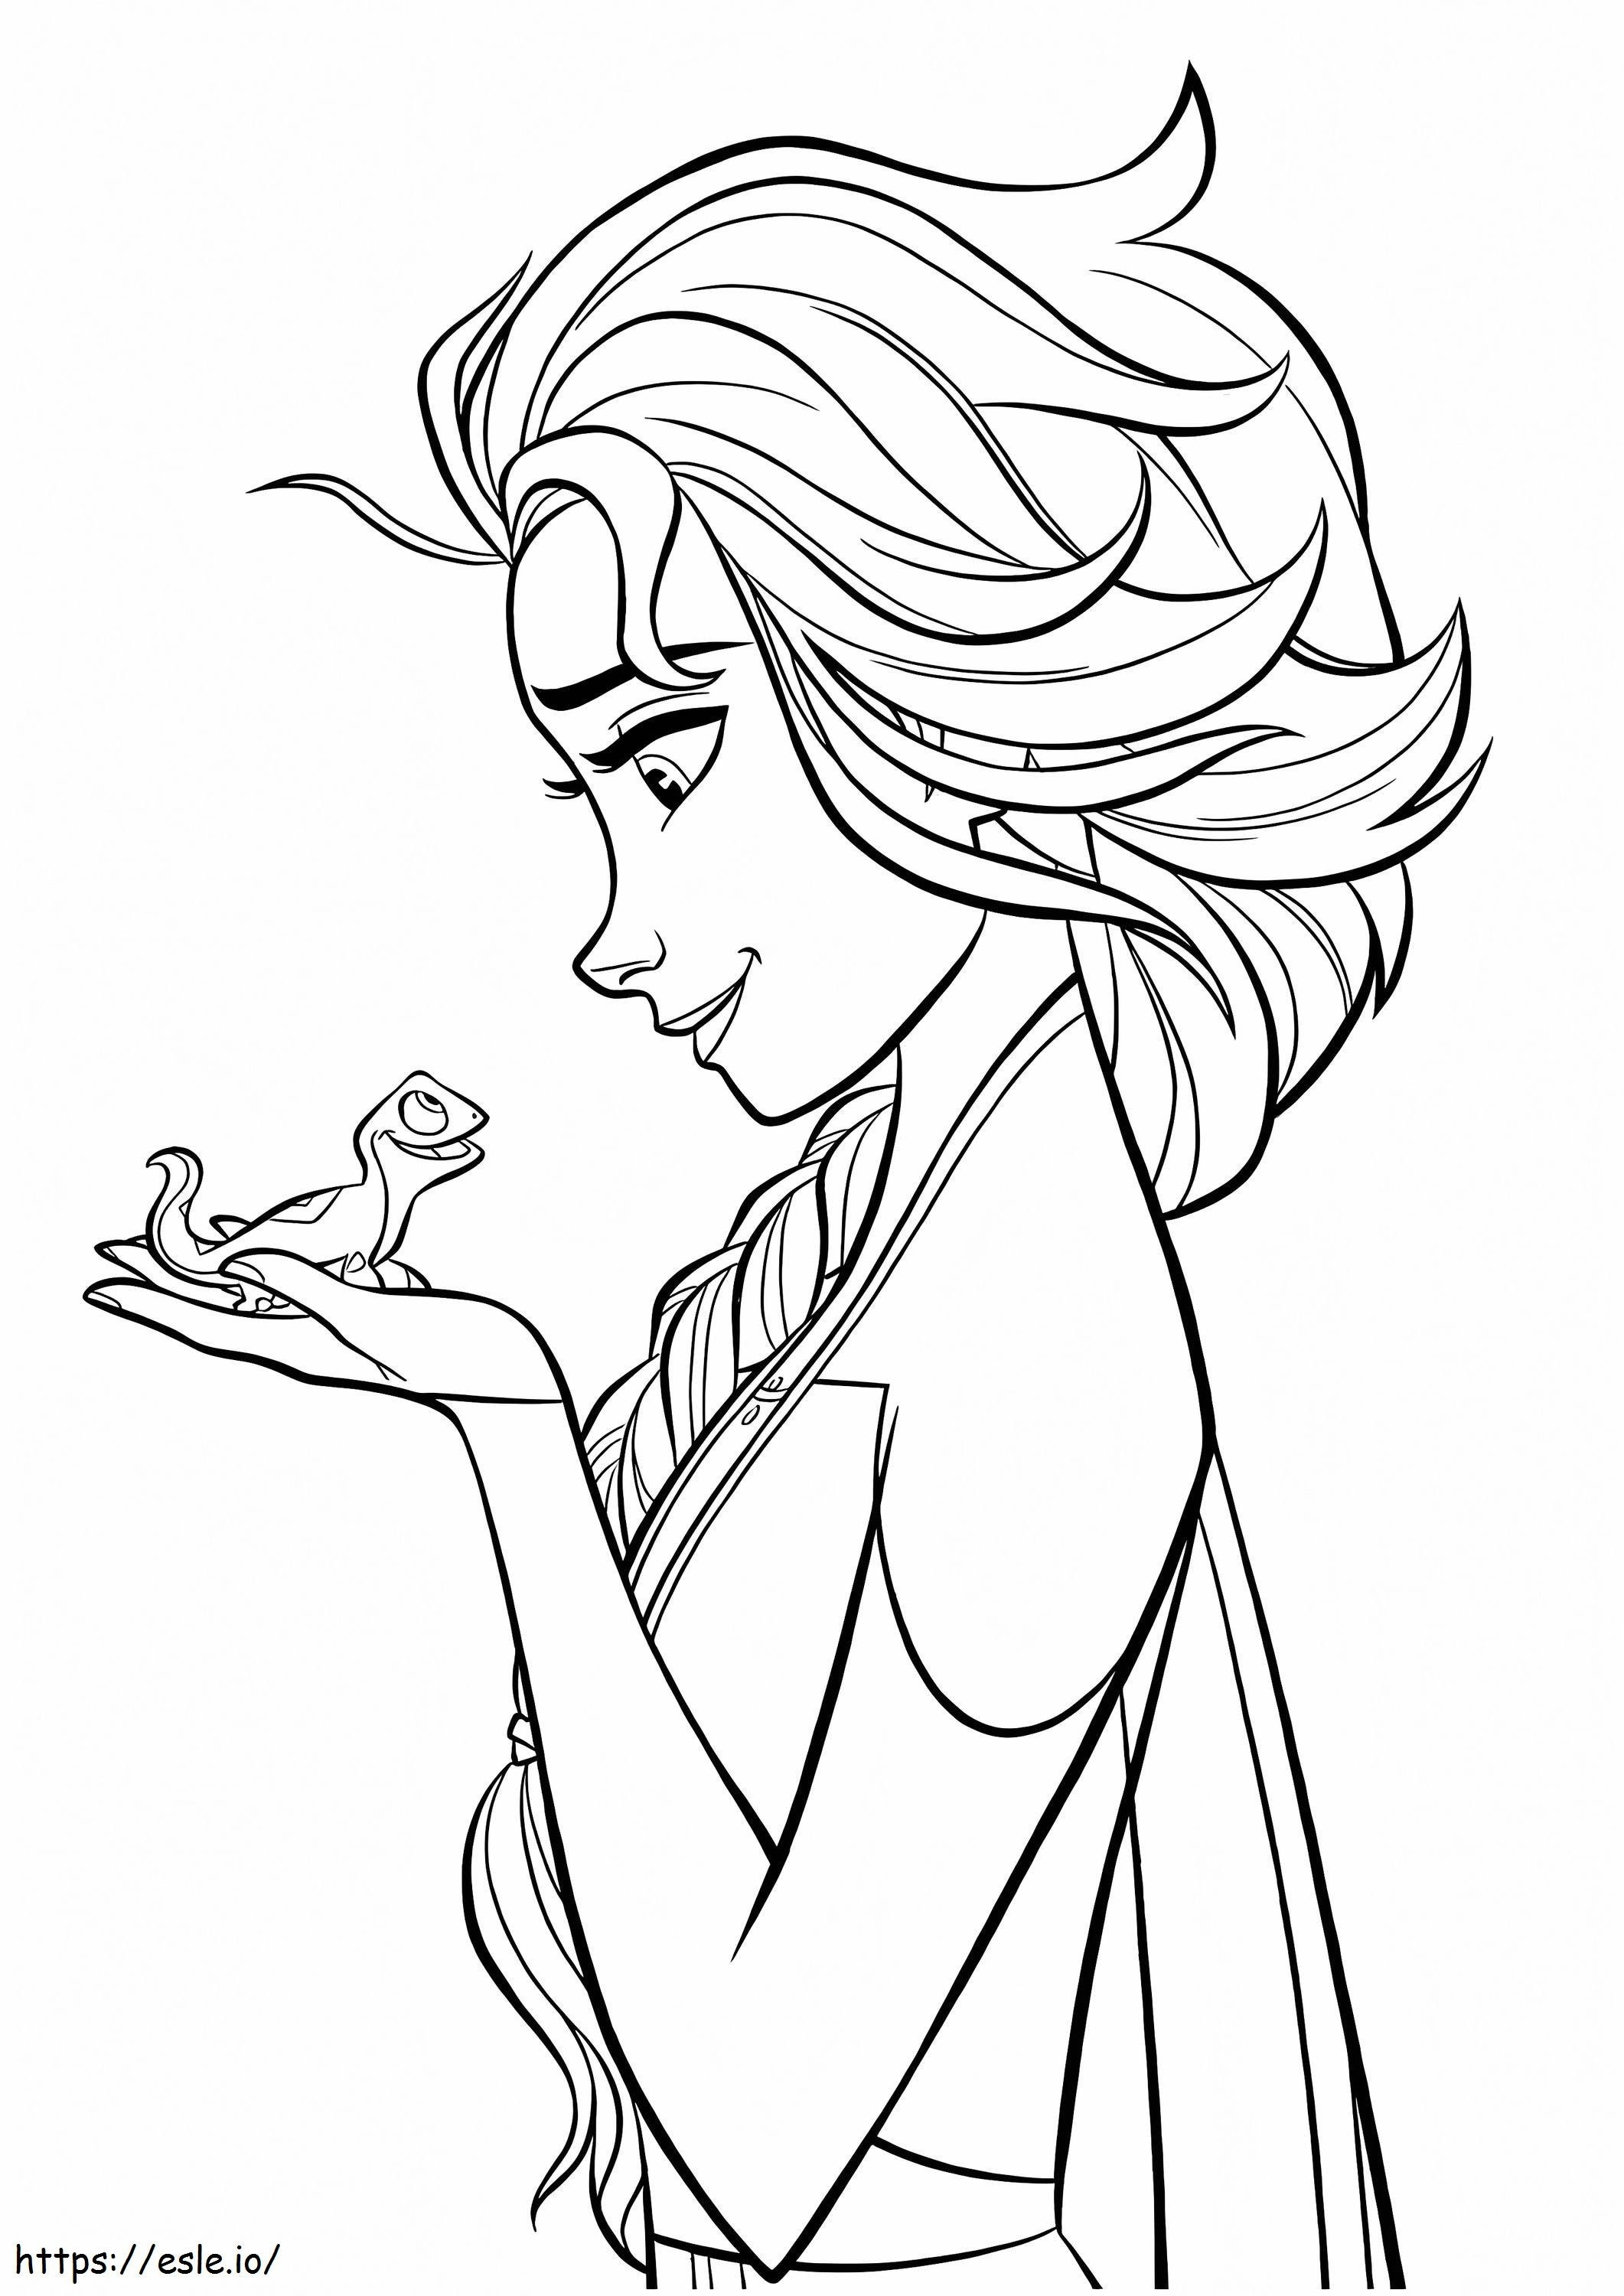 Elsa And Bruni Frozen 2 Coloring Page coloring page